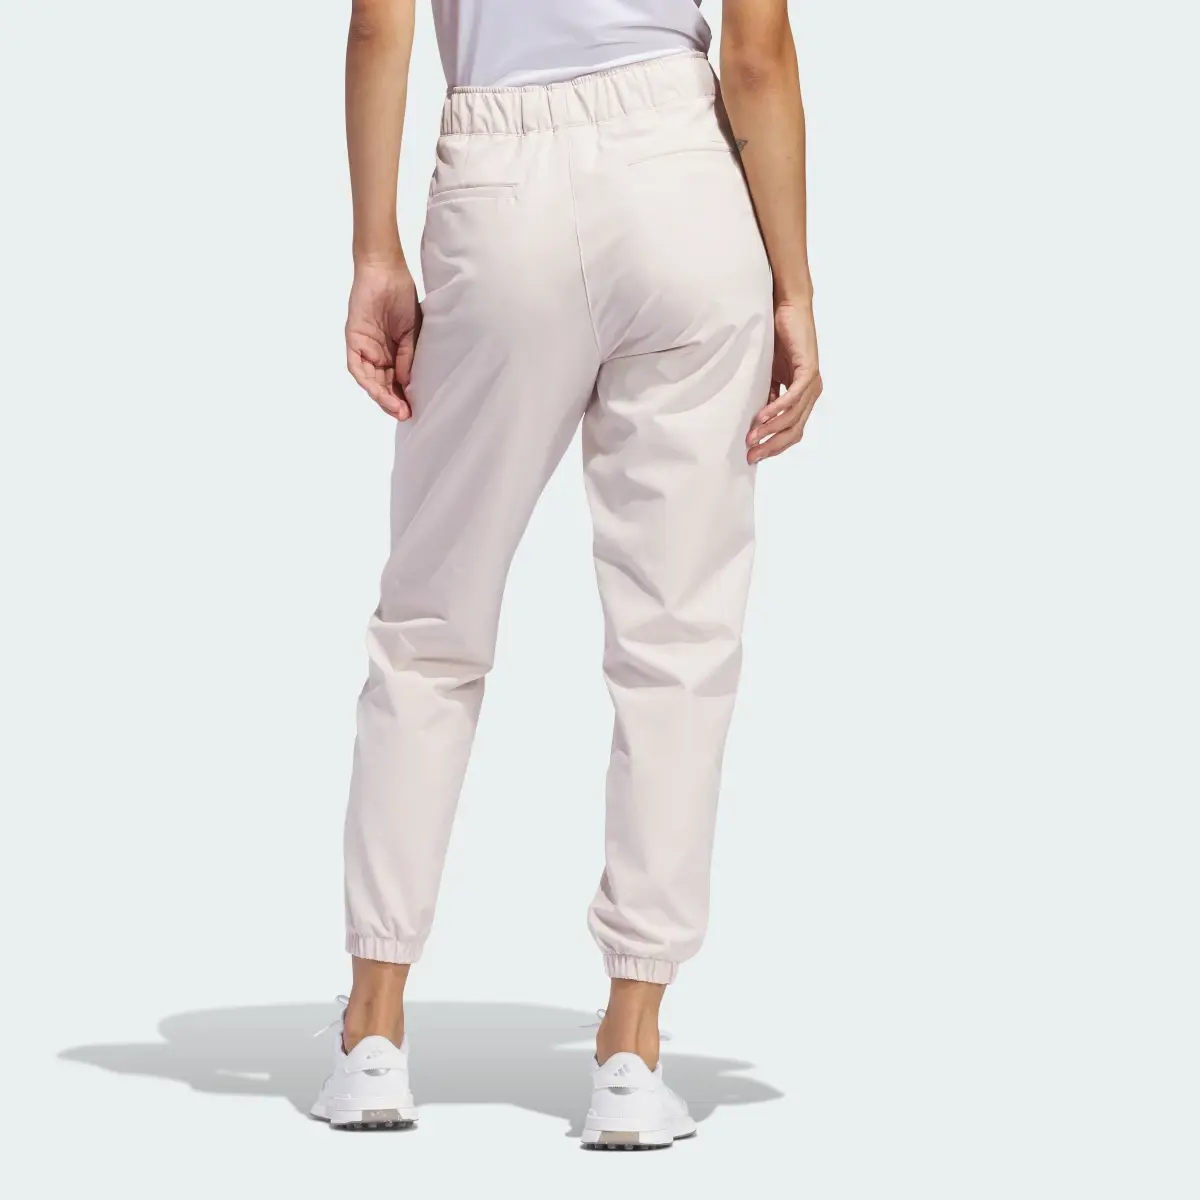 Adidas Women's Ultimate365 Joggers. 2